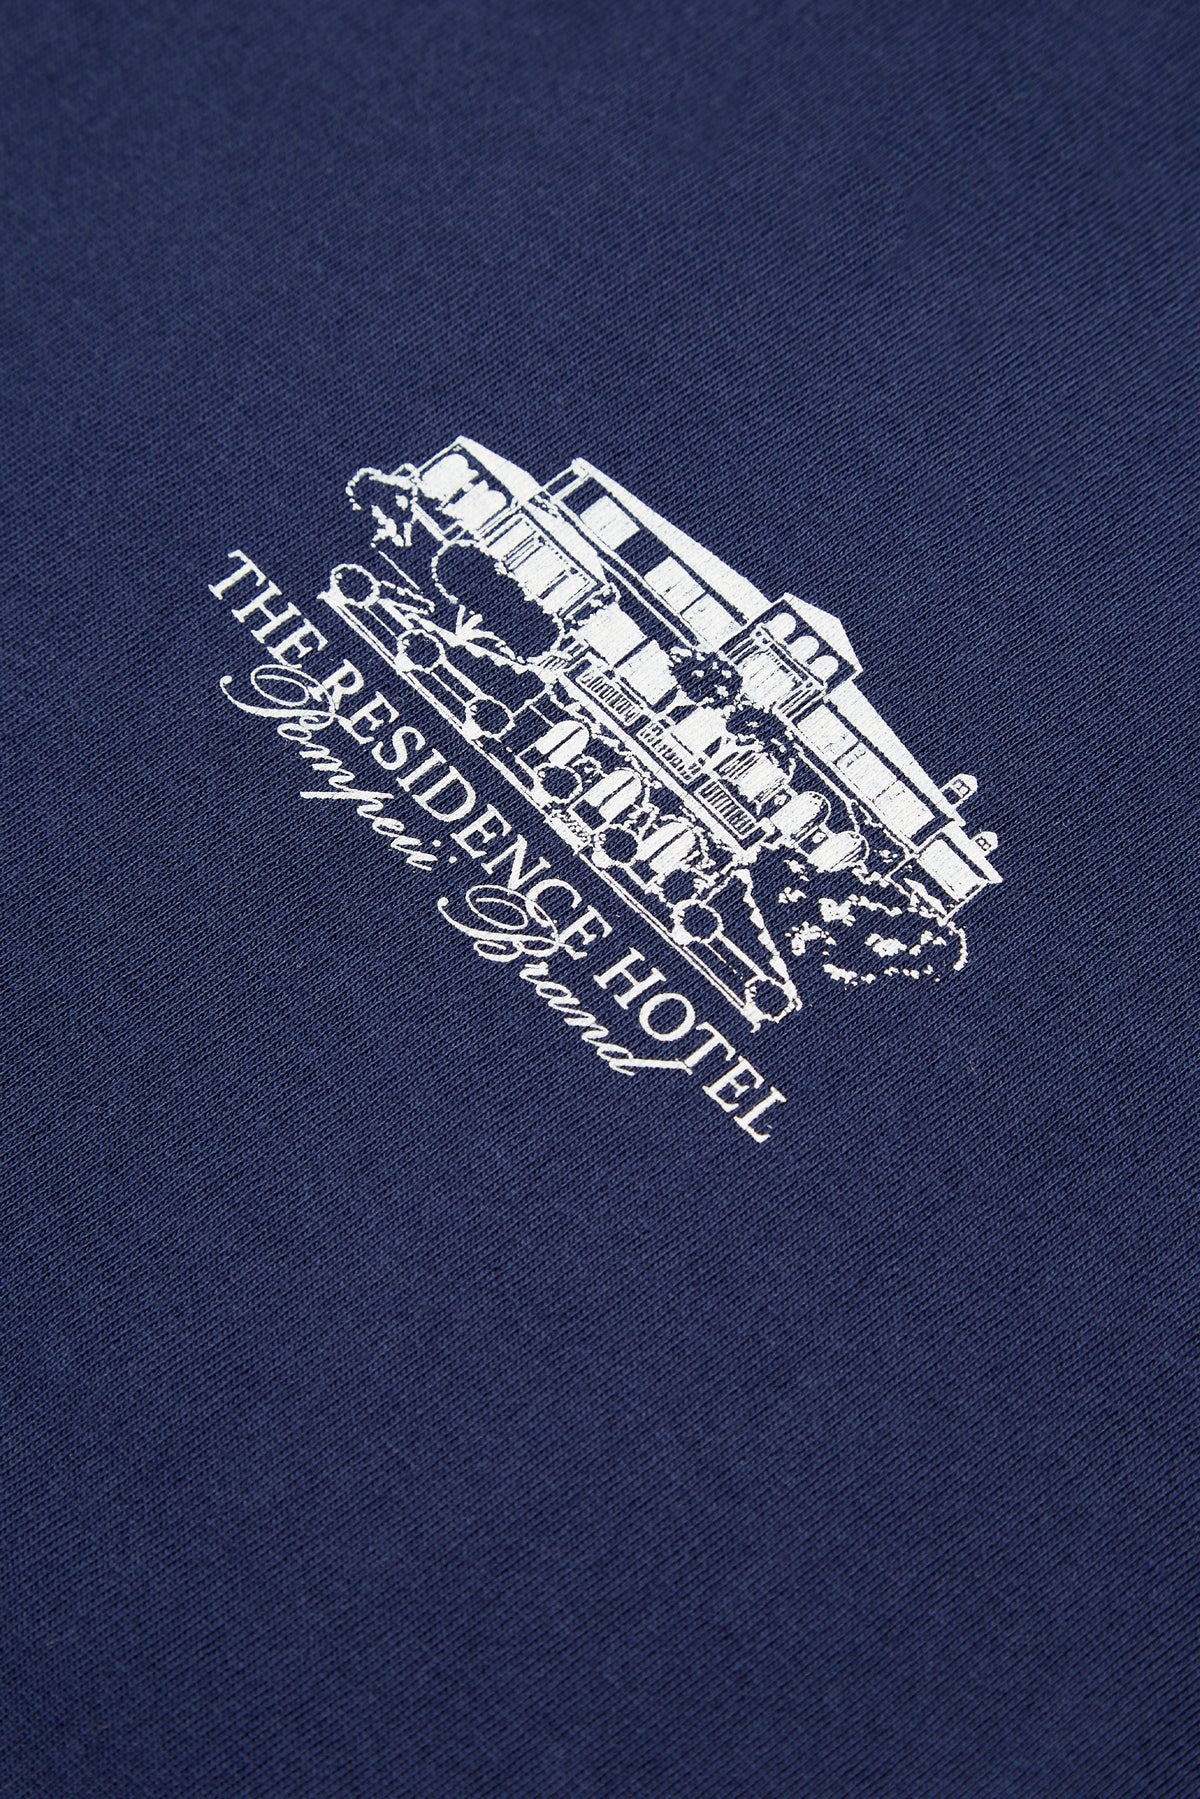 TEE-SHIRT GRAPHIQUE NAVY HOTEL NOTE